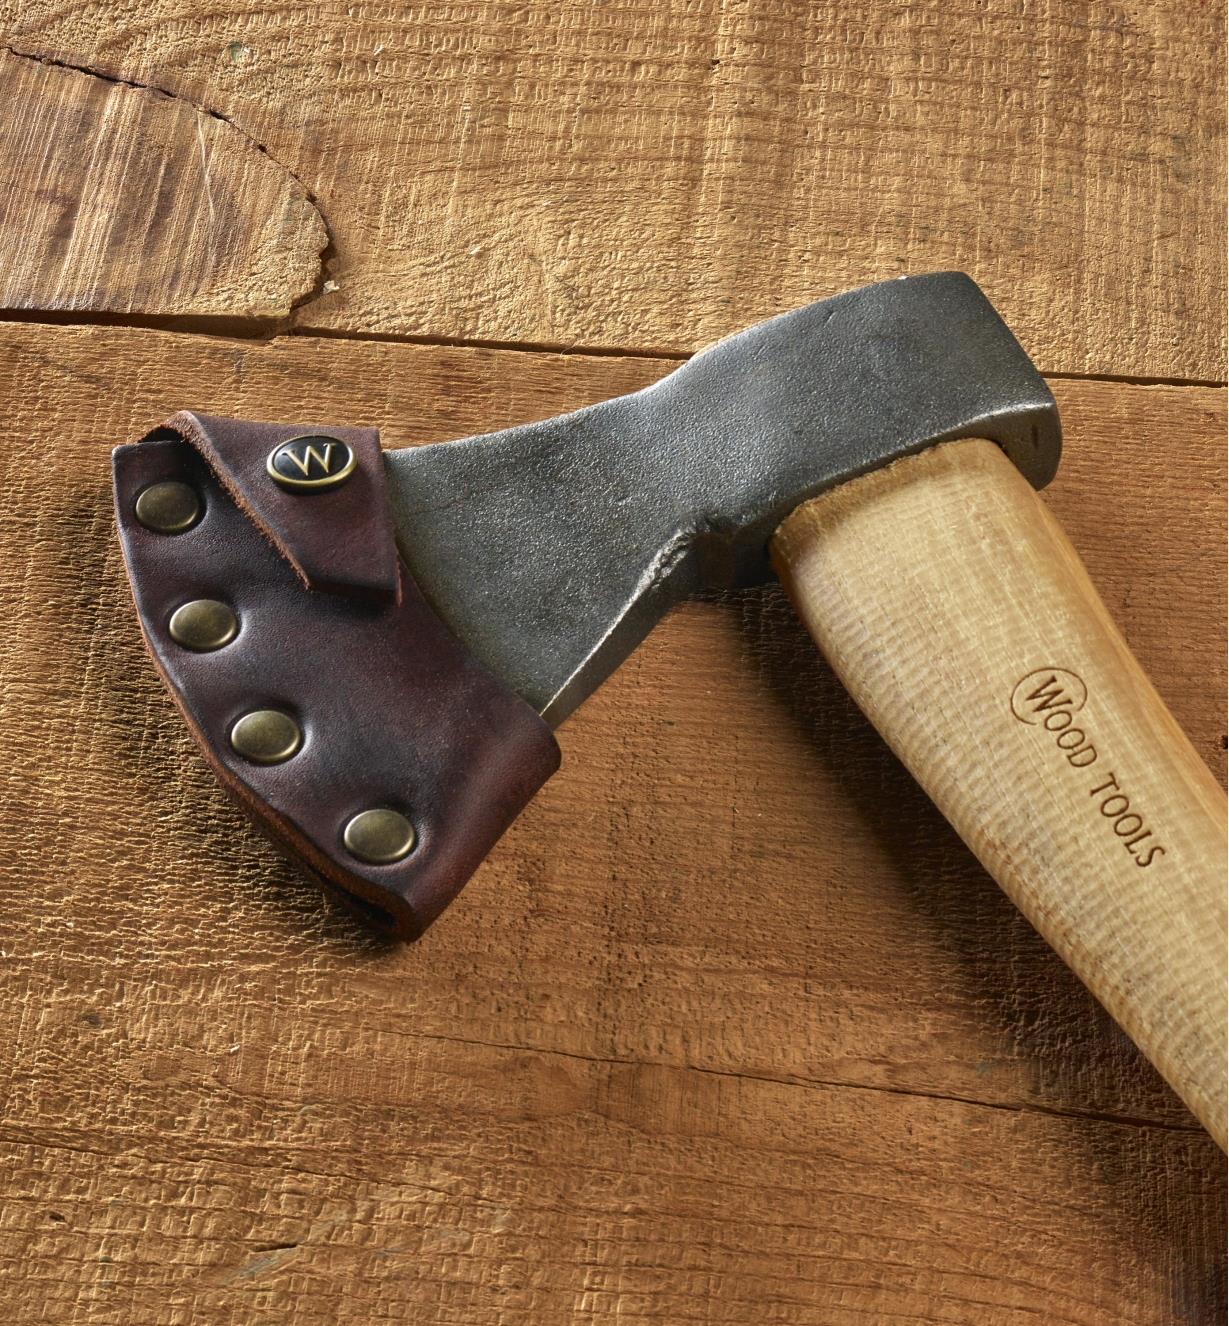 A carving axe with the leather sheath attached rests on a wood background